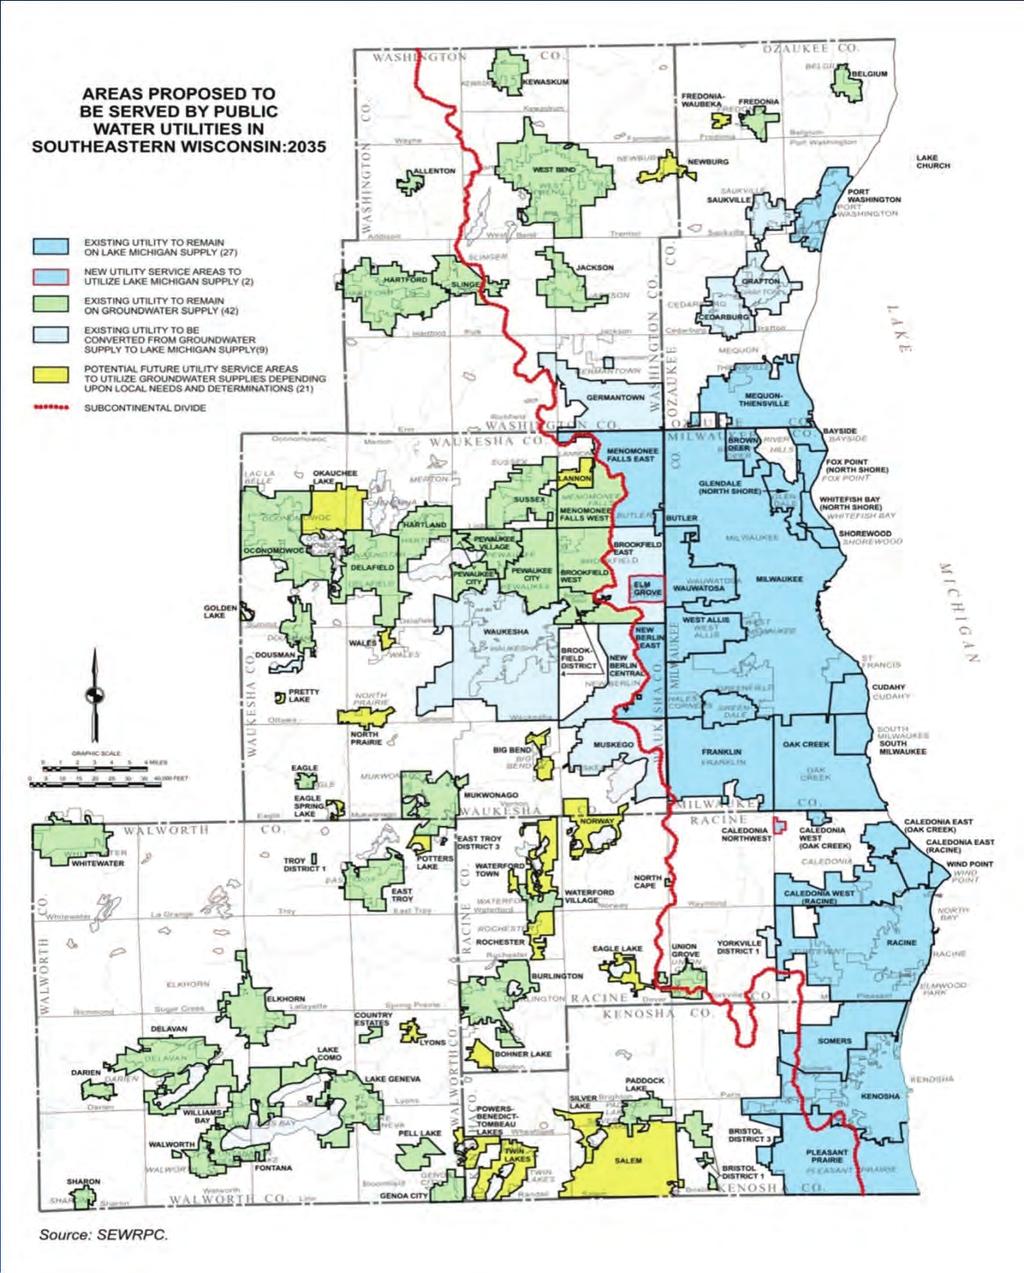 Sources of Supply Plan Component Selected Waukesha County areas currently served by individual wells were identified as having the potential to be served by long-term municipal water supply service -